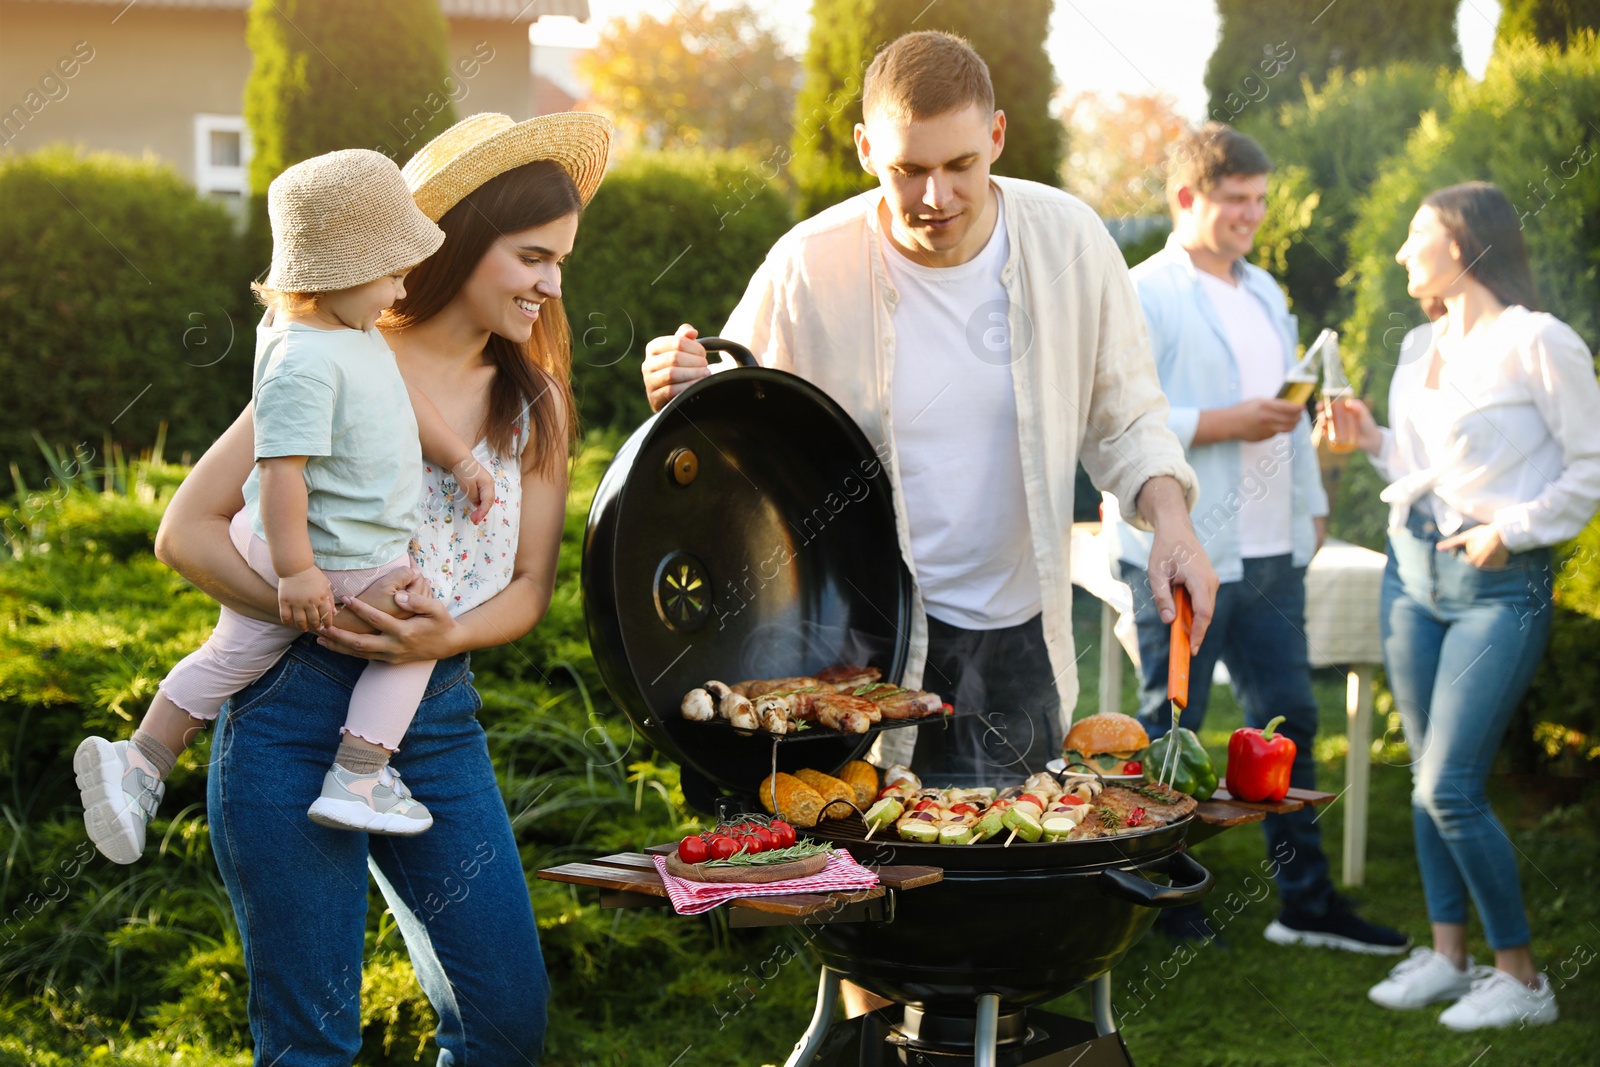 Photo of Family with friends having barbecue party outdoors